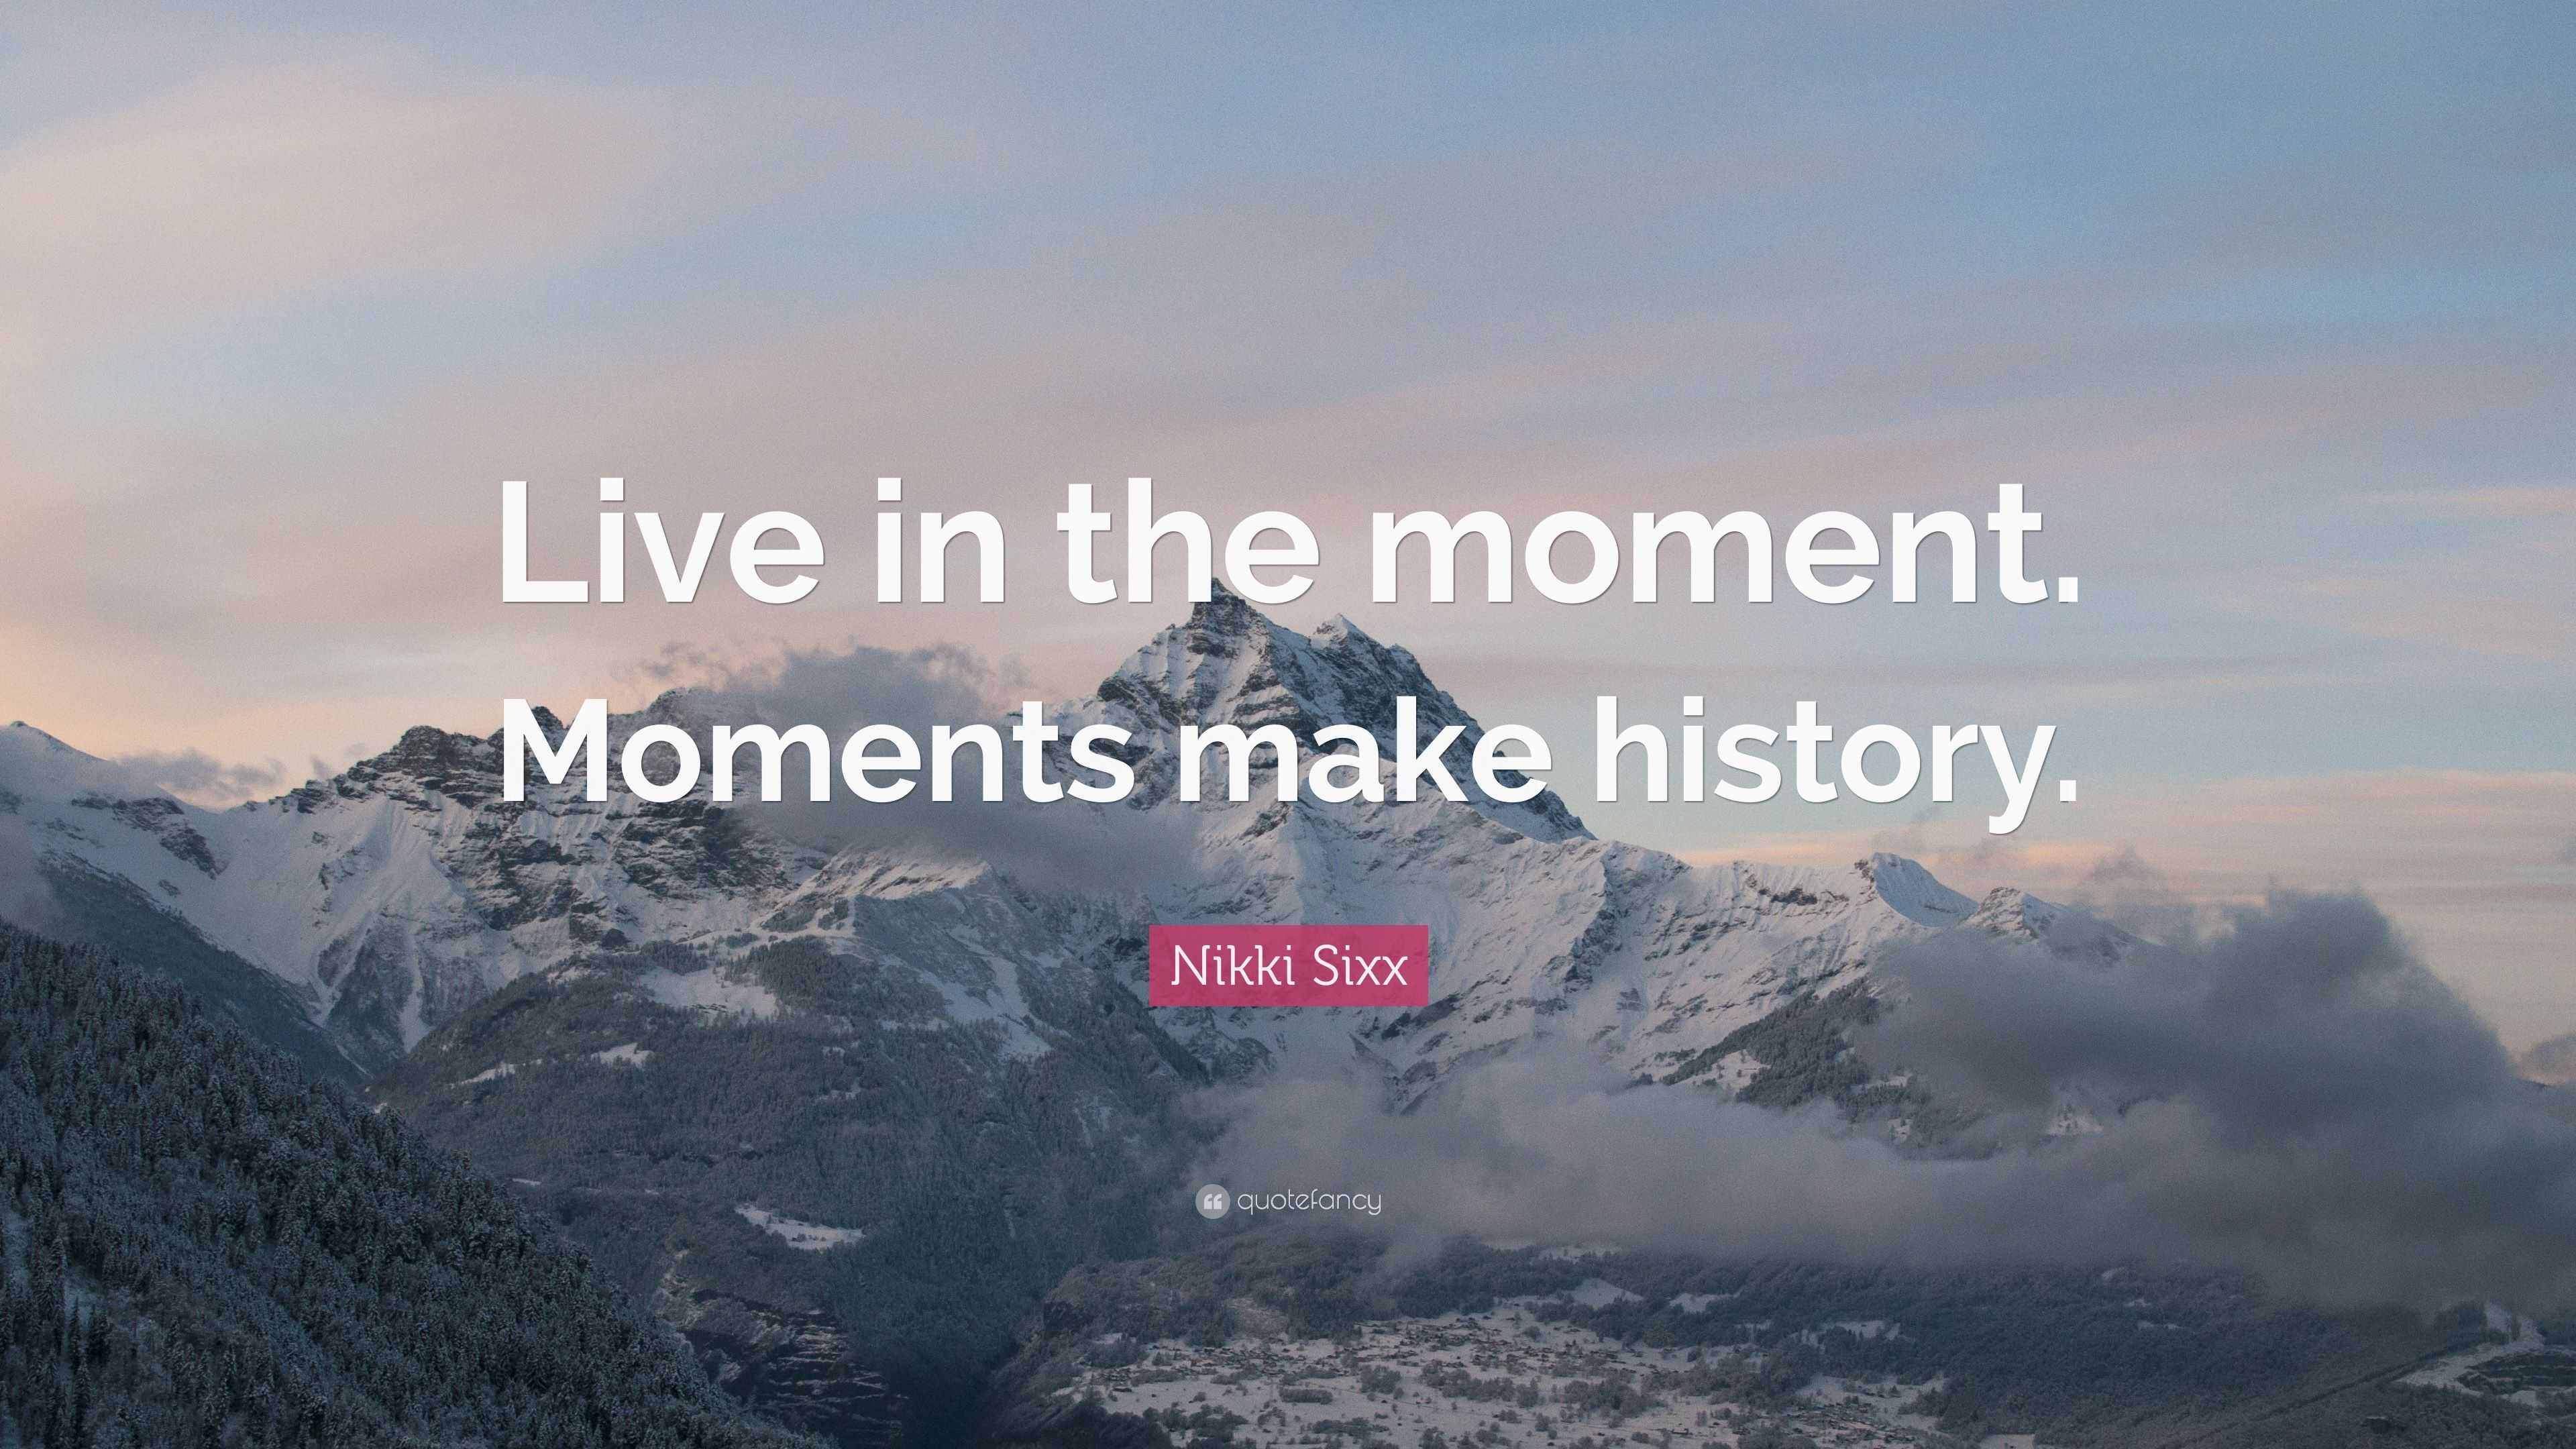 Nikki Sixx Quote: “Live in the moment. Moments make history.”